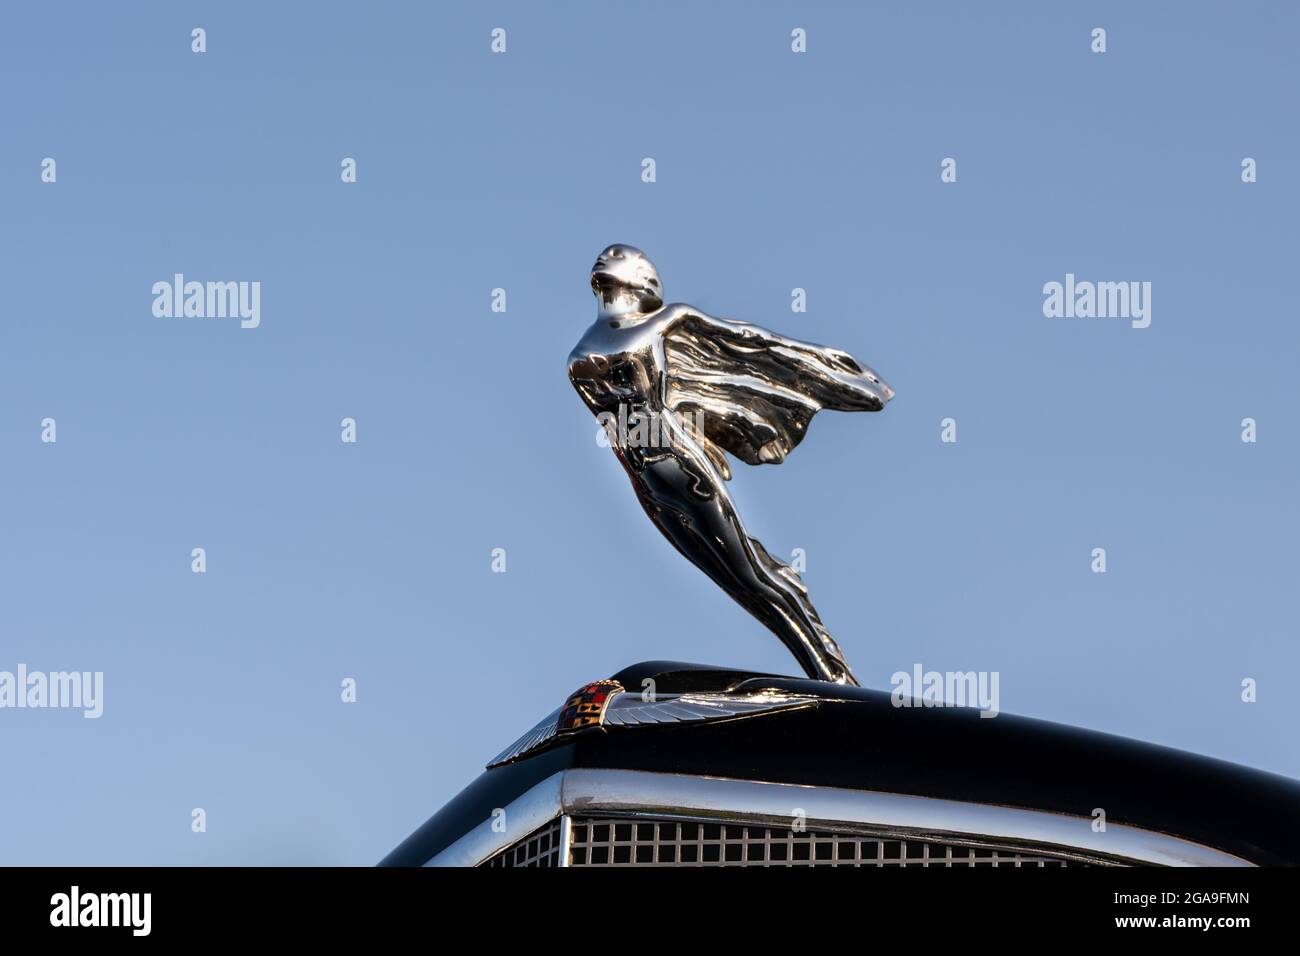 PLYMOUTH, MI/USA - JULY 26, 2021: Close-up of a 1933 Cadillac Series 452 V16 Flying Lady hood ornament at Concours d'Elegance of America at The Inn at Stock Photo